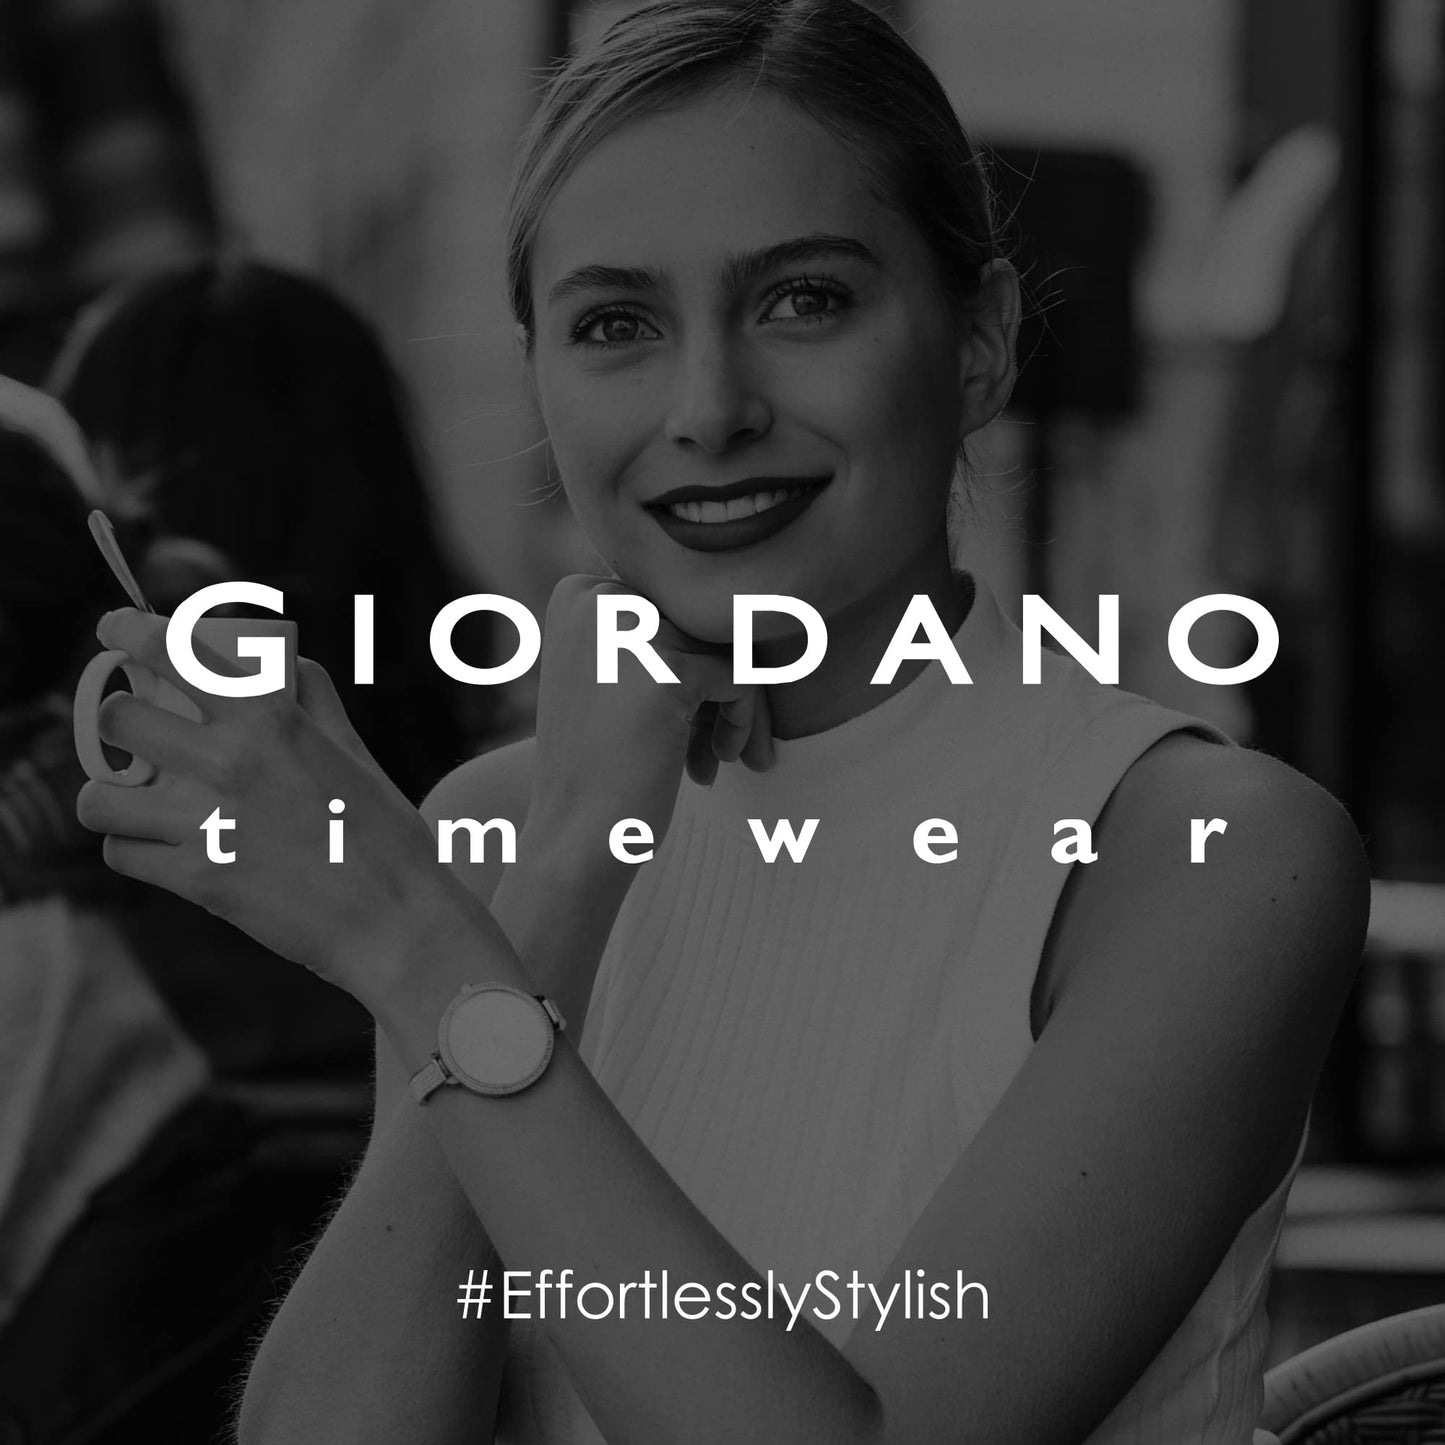 Giordano Analog Stylish Watch for Women Water Resistant Fashion Watch Round Shape with 3 Hand Mechanism Wrist Watch to Compliment Your Look/Ideal Gift for Female - GZ-60078-11